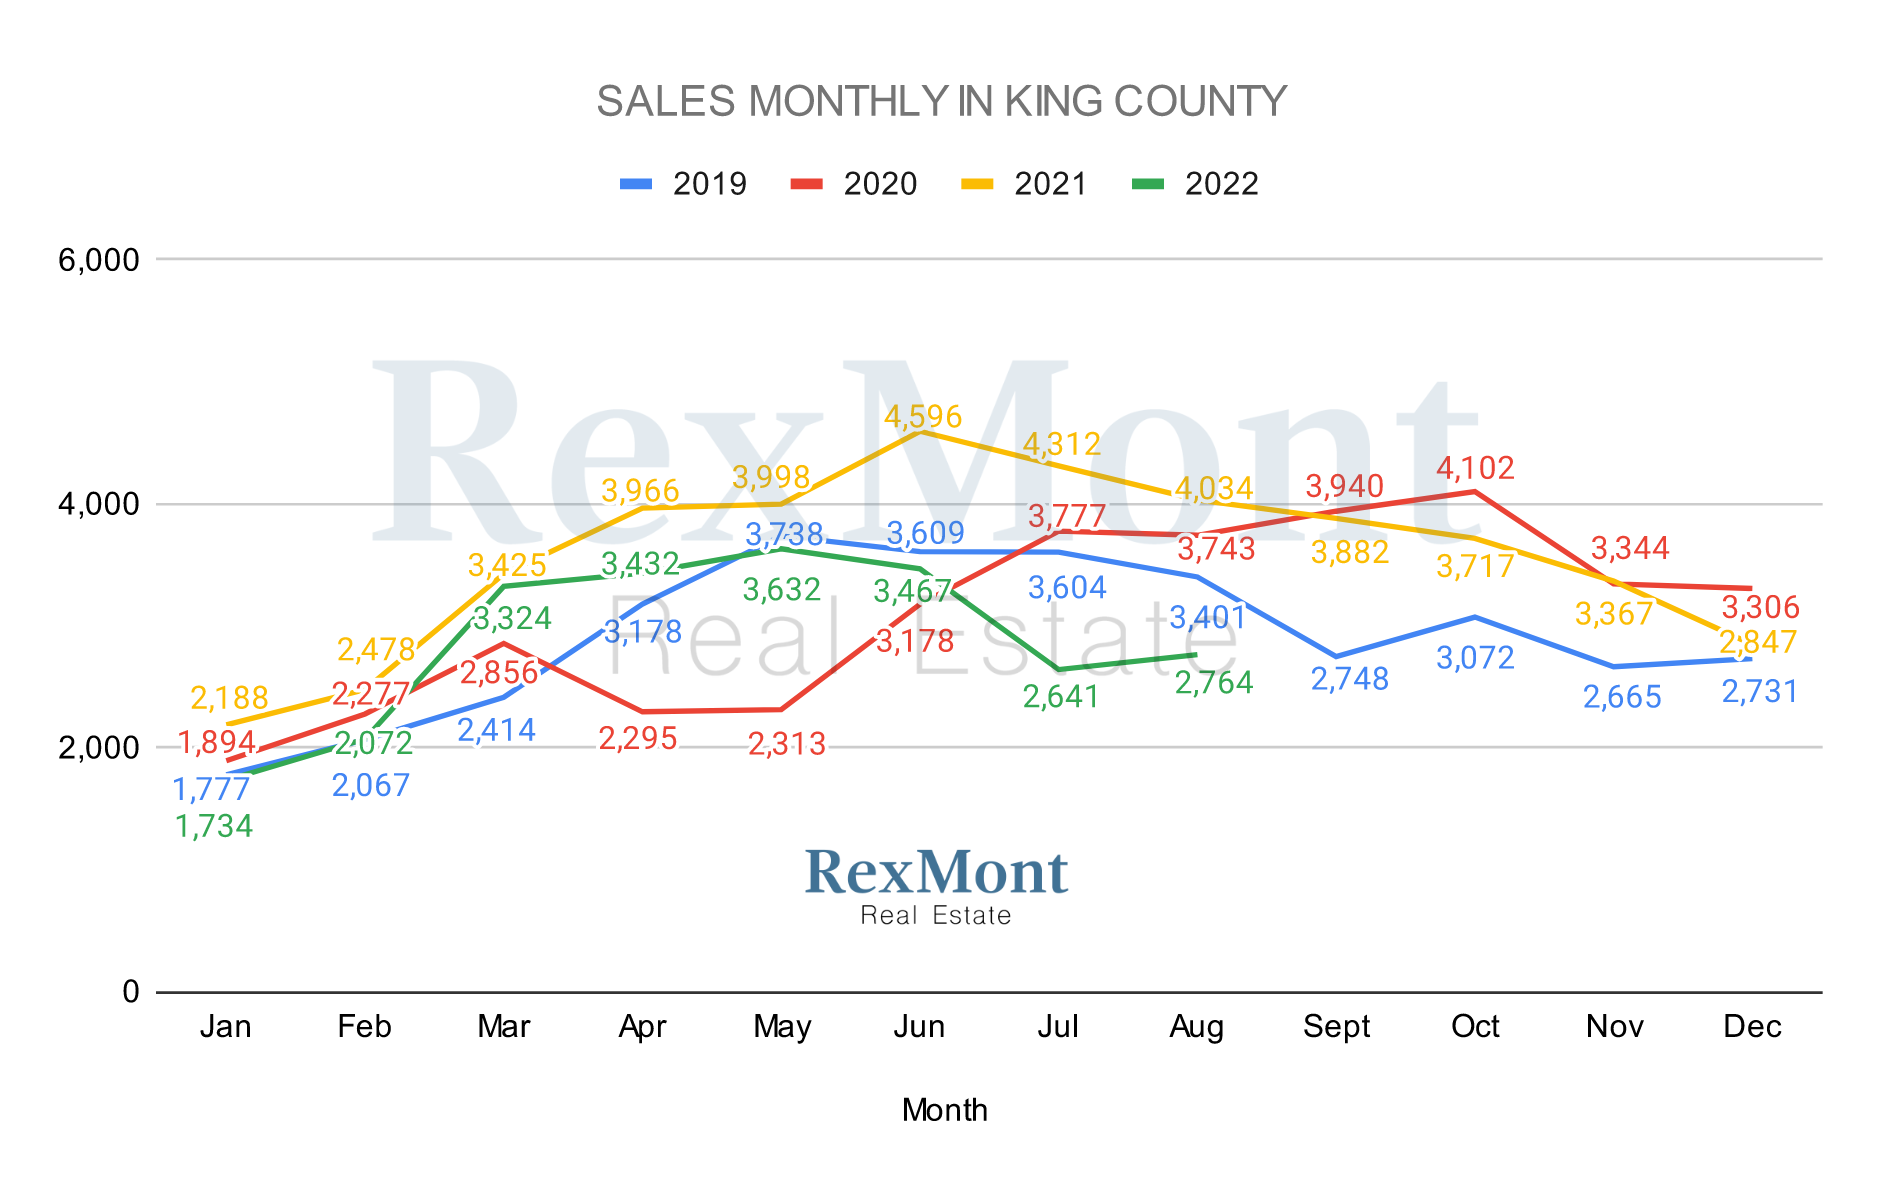 Graph of King County Home Sales By Month